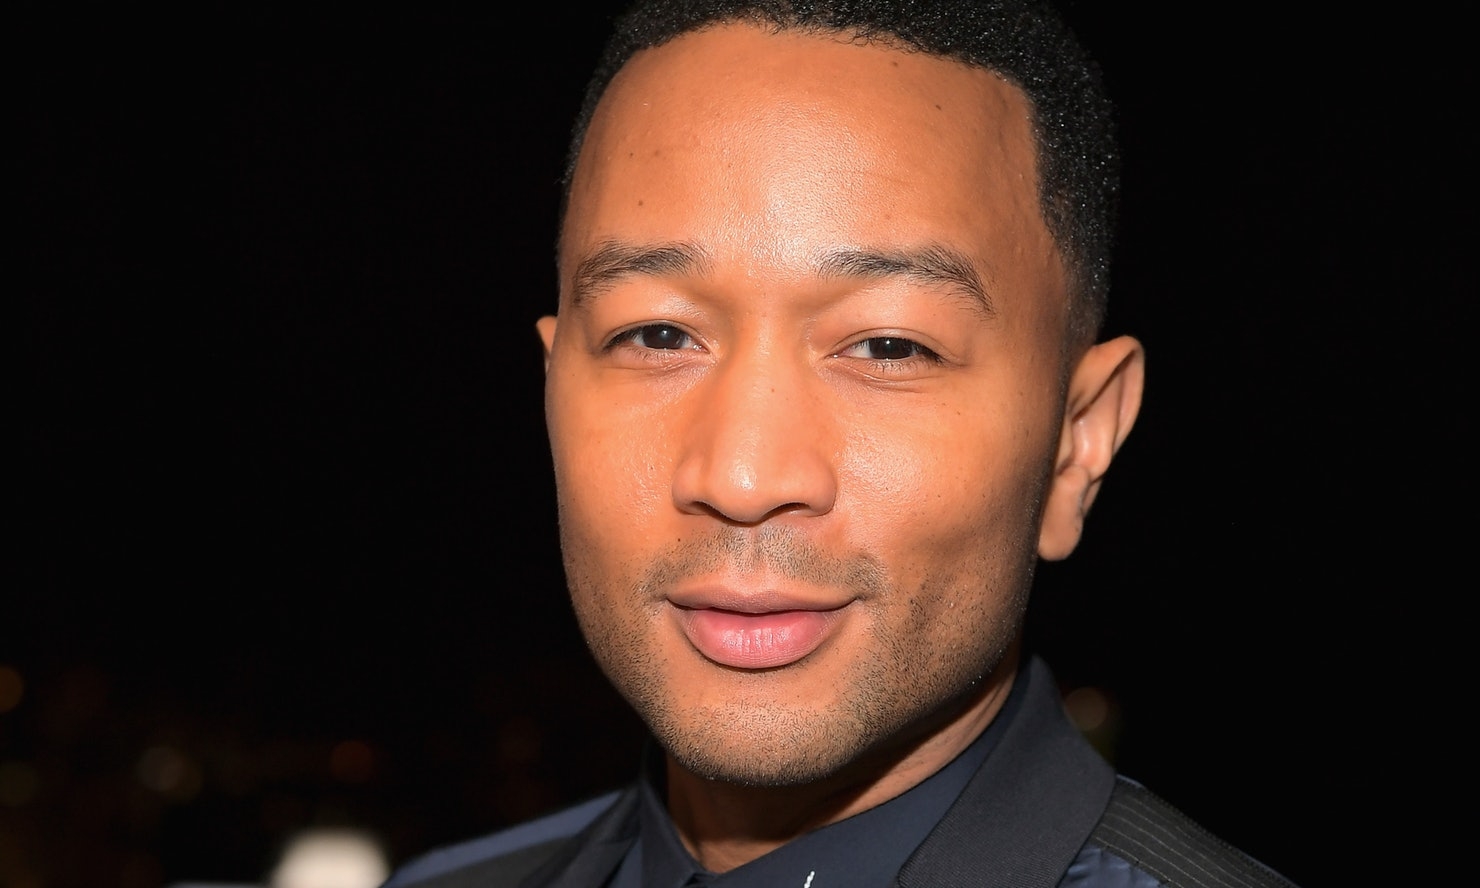 John Legend Is Starring In ‘Jesus Christ Superstar’ & He’s Even More Excited Than You Are